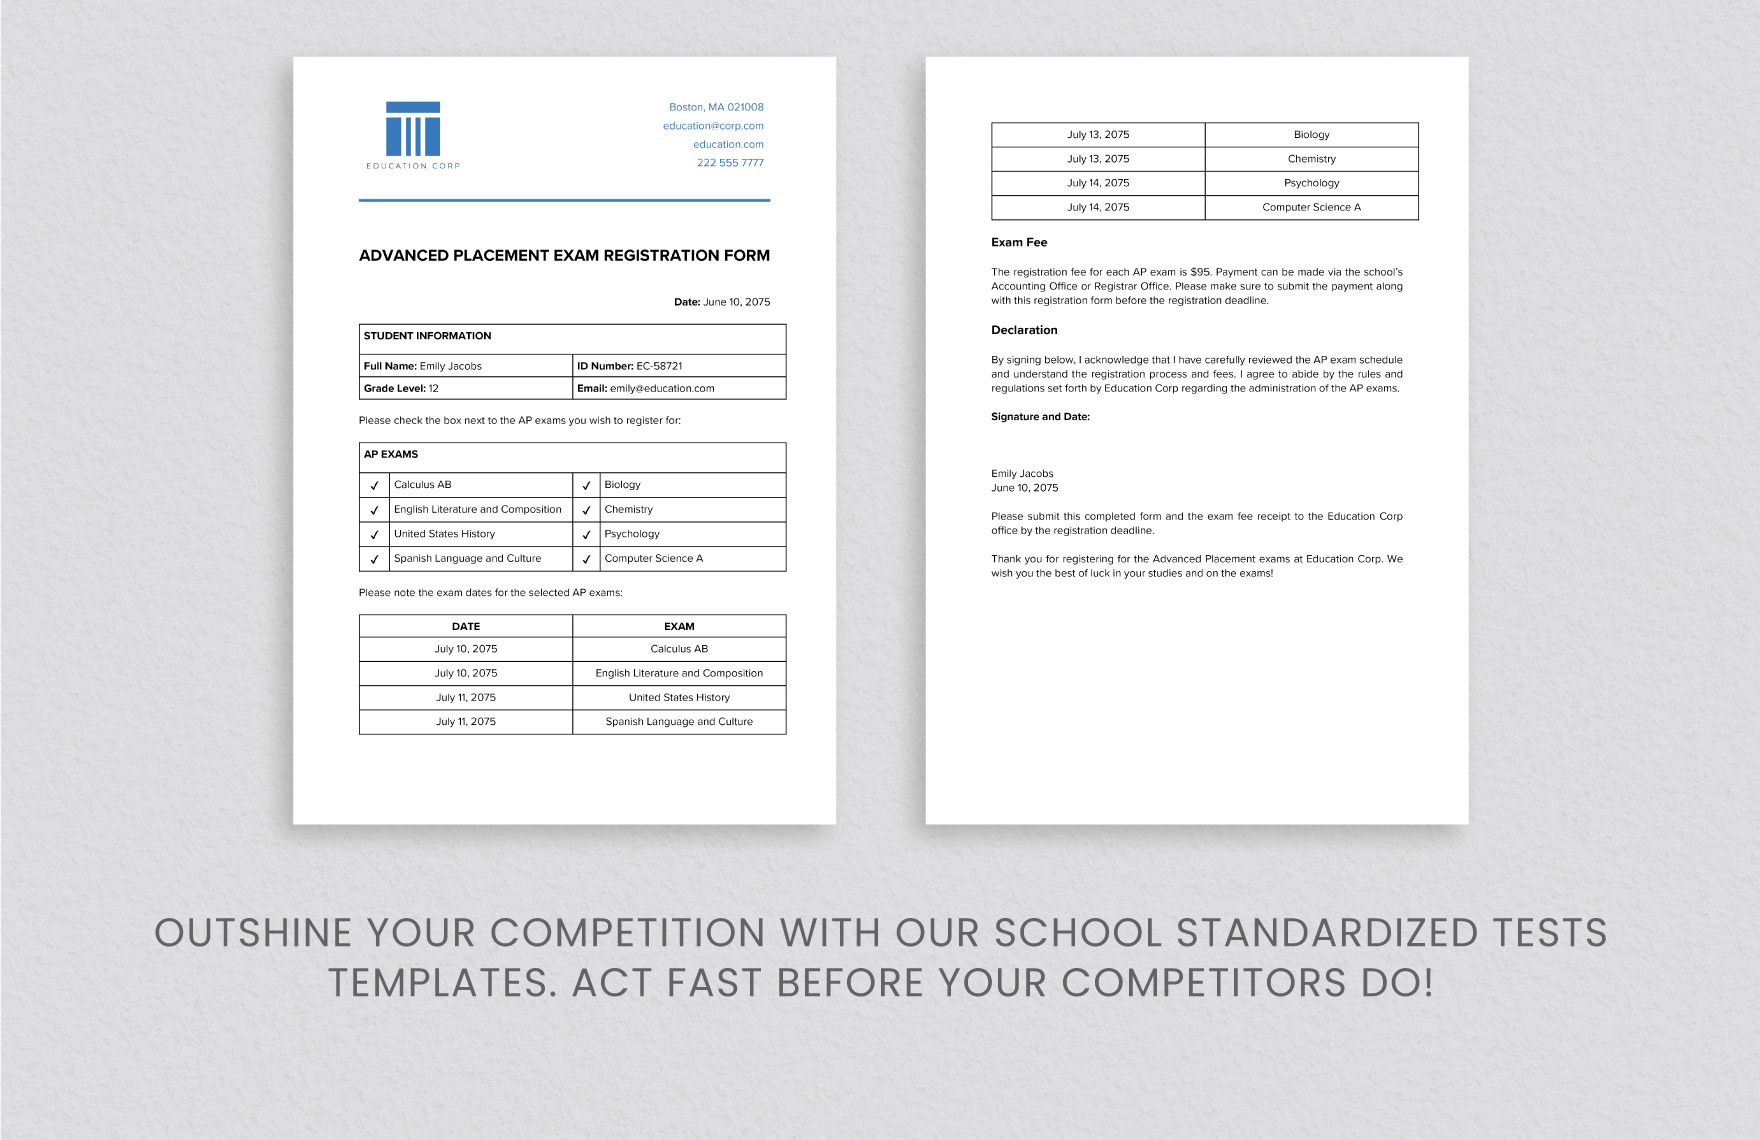 Advanced Placement Exam Registration Form Template